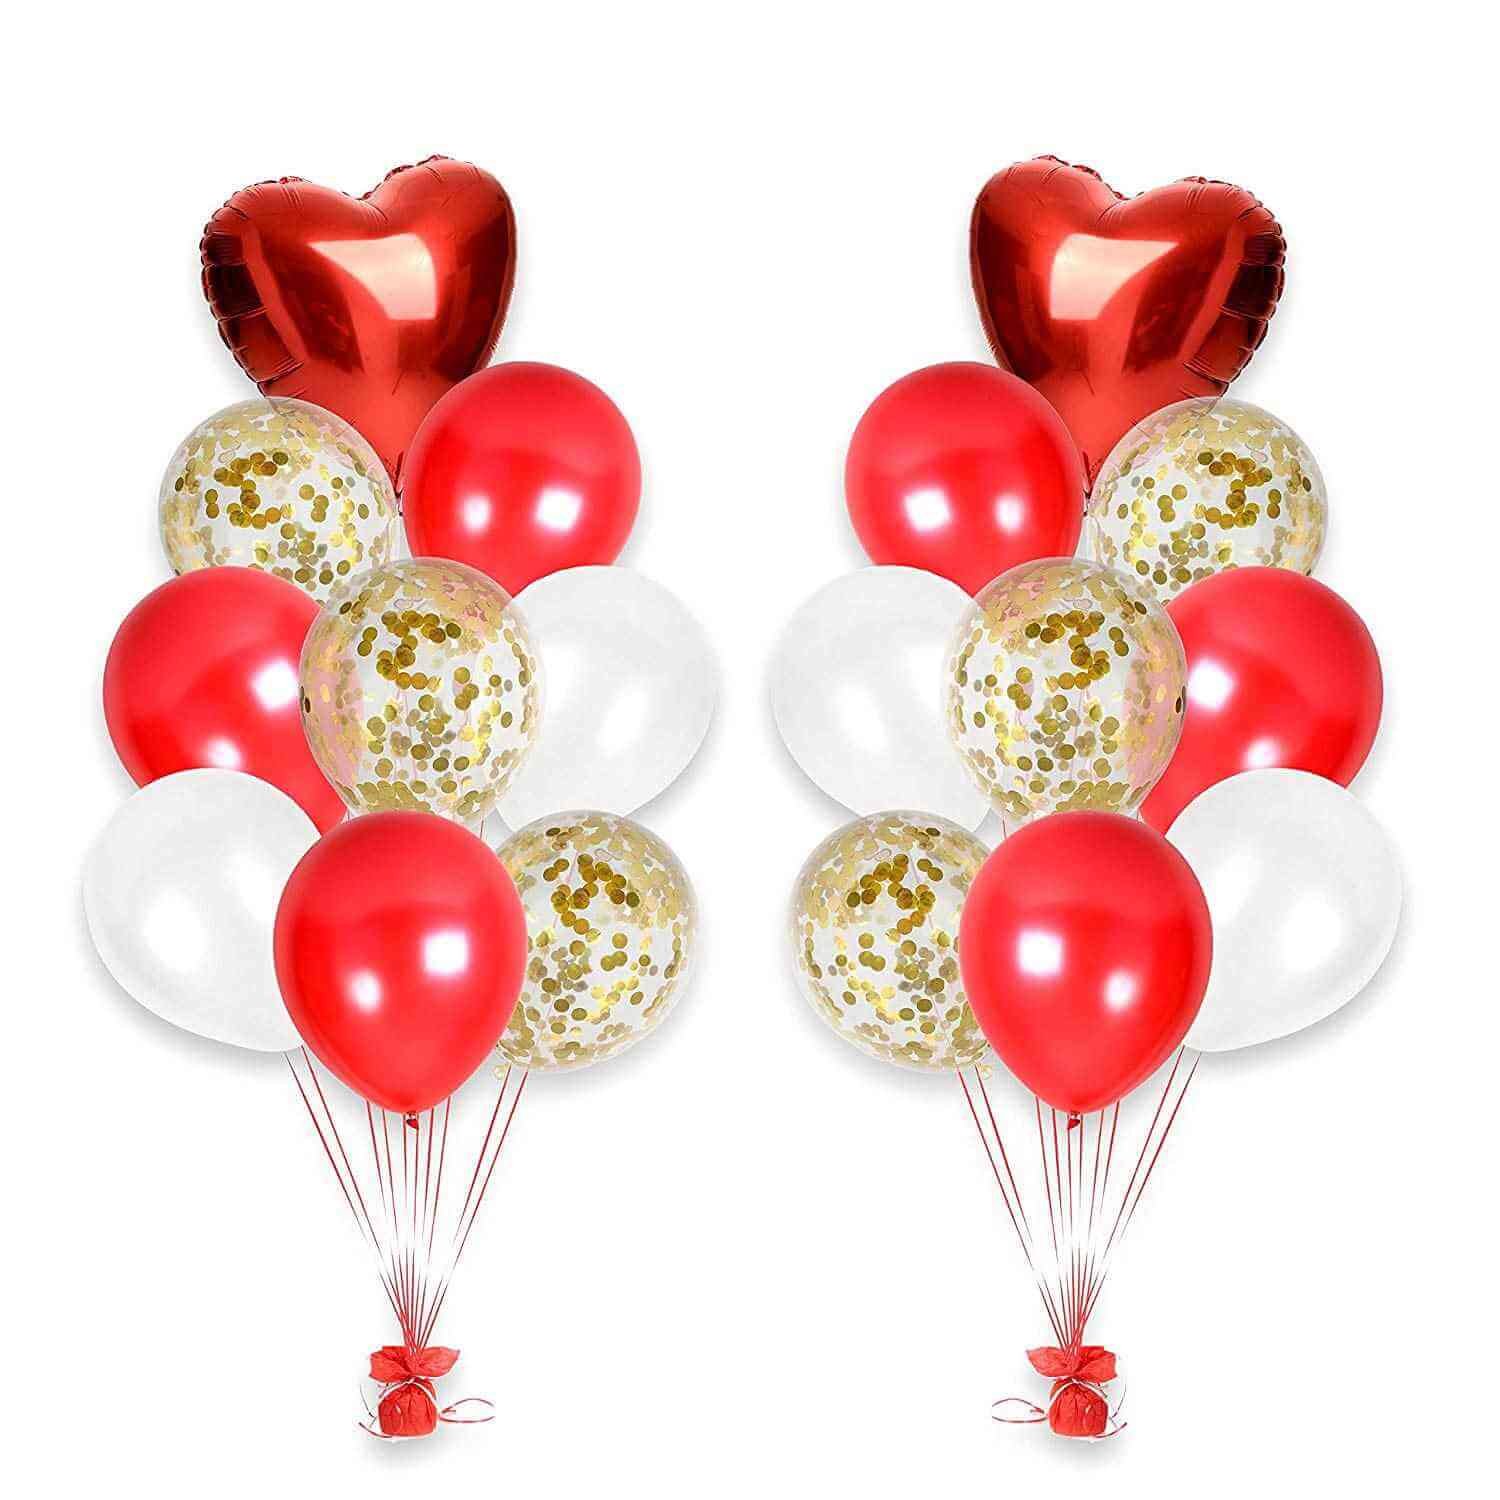 red, white and confetti balloons for valentines day